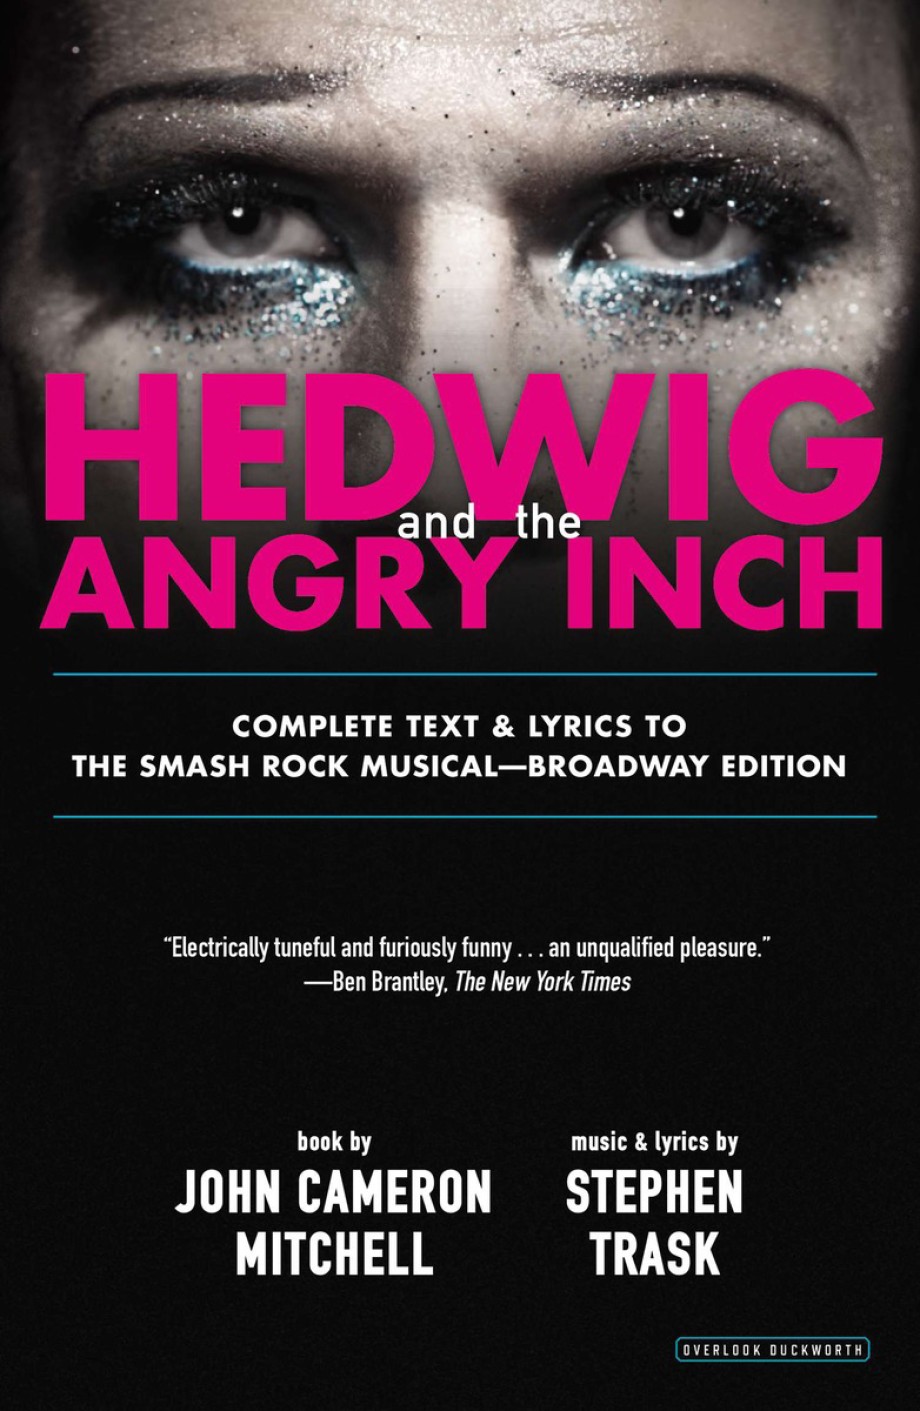 Hedwig and the Angry Inch Broadway Edition